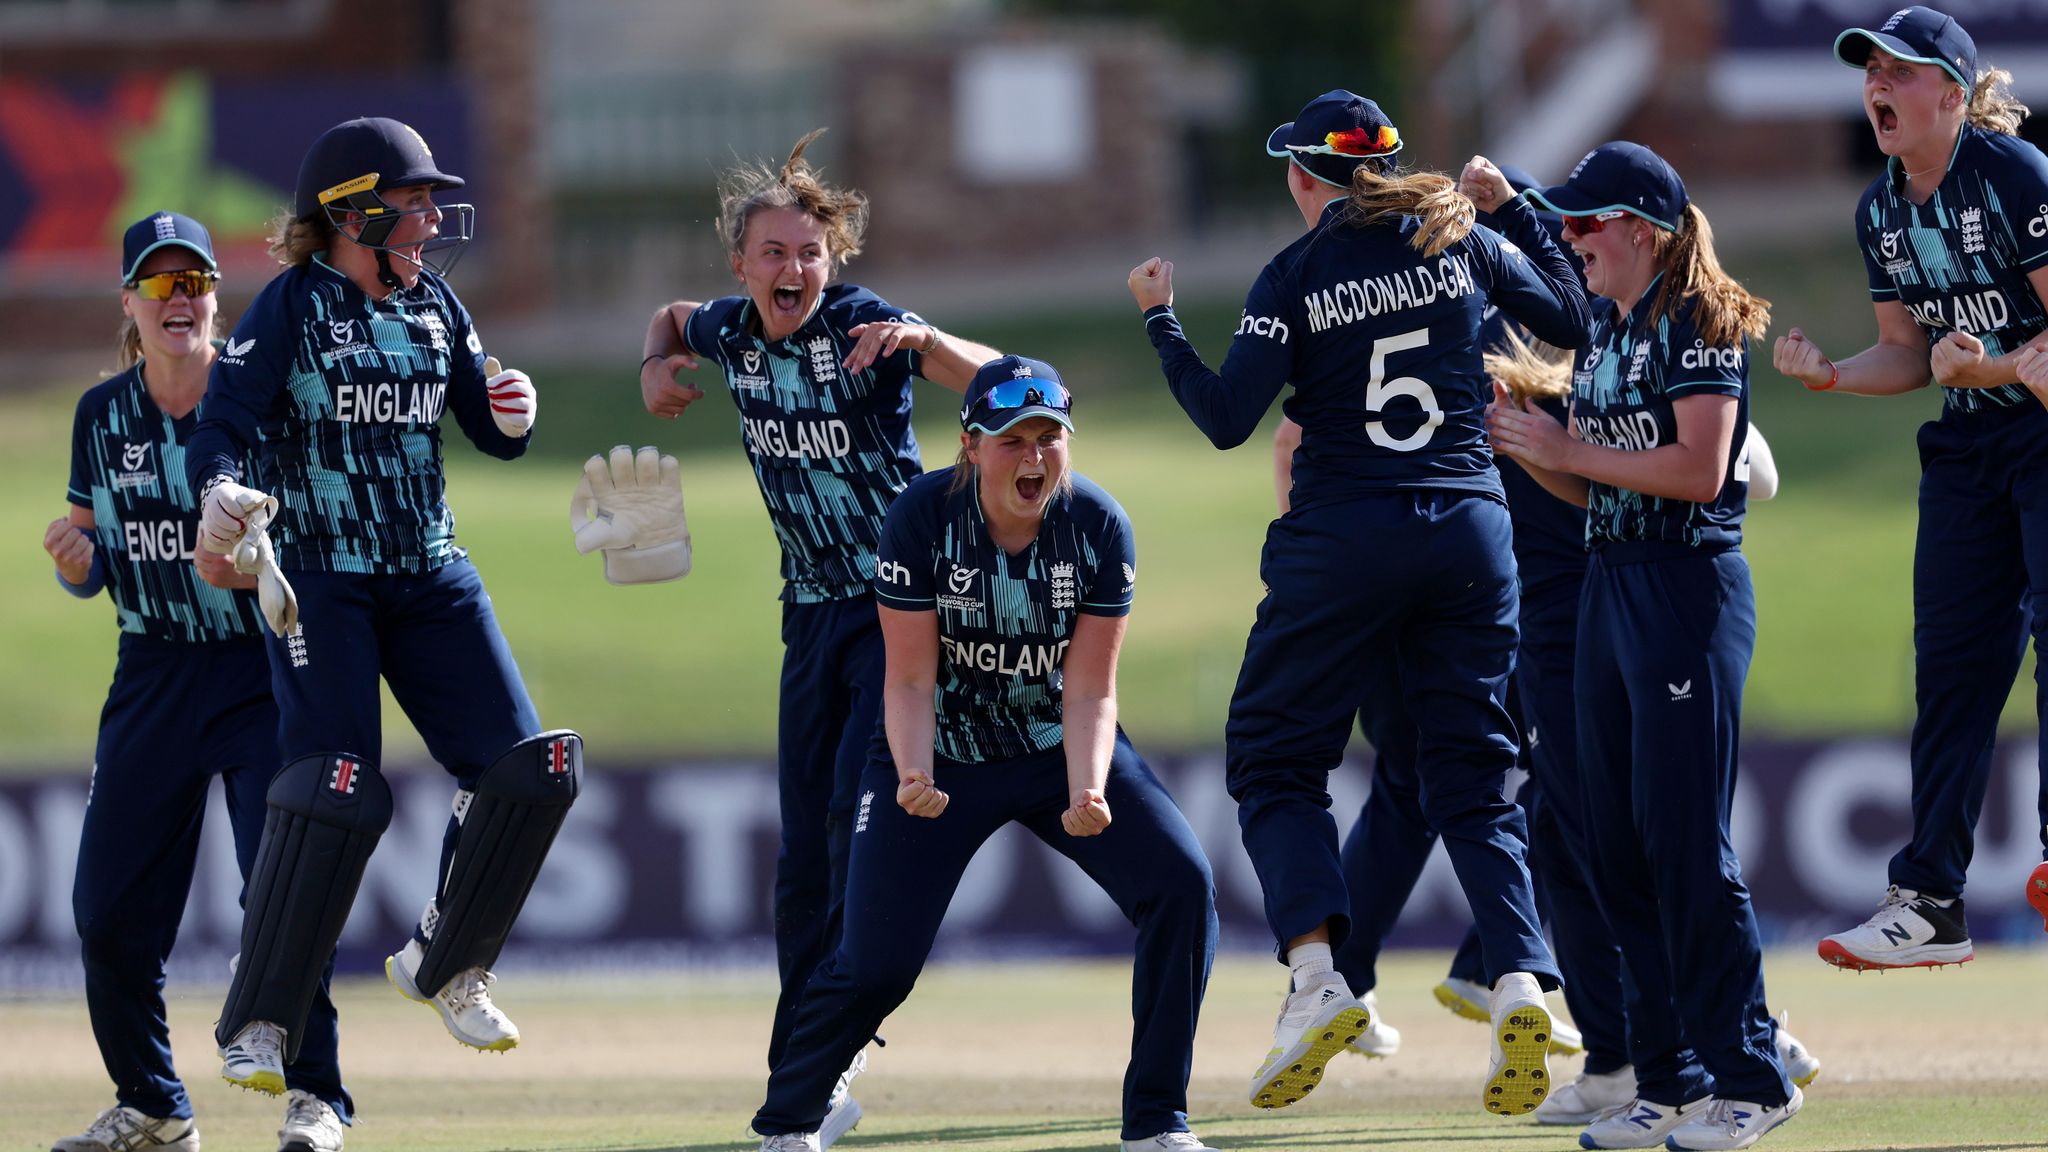 History beckons for England as they play India in inaugural ICC Women's ...